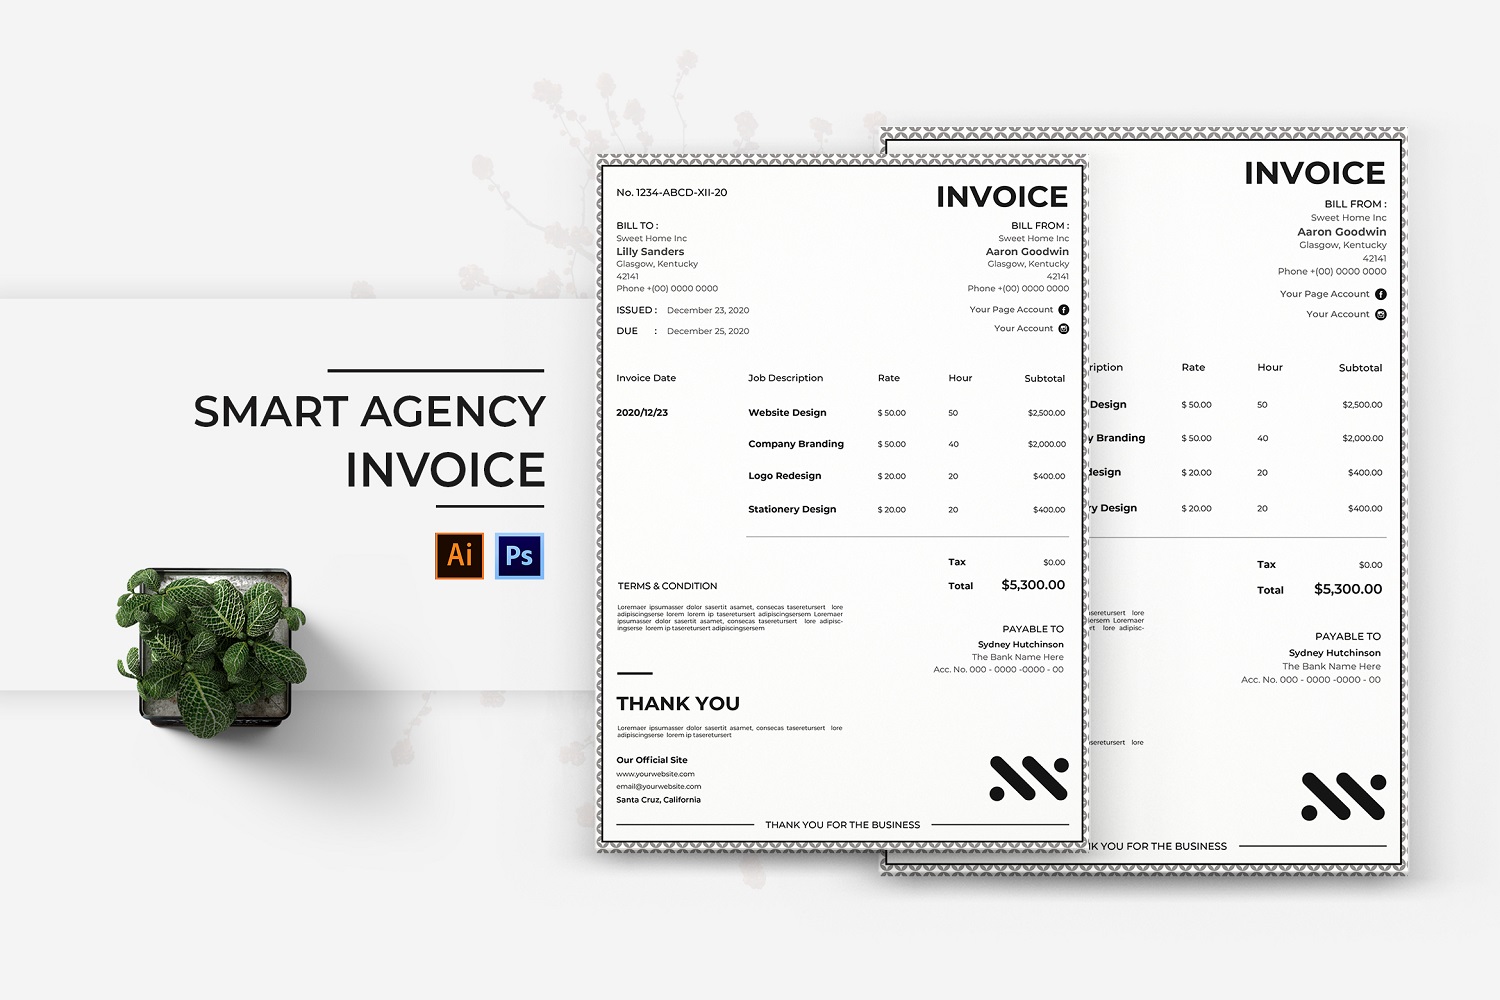 Smart Agency Invoice Print Template